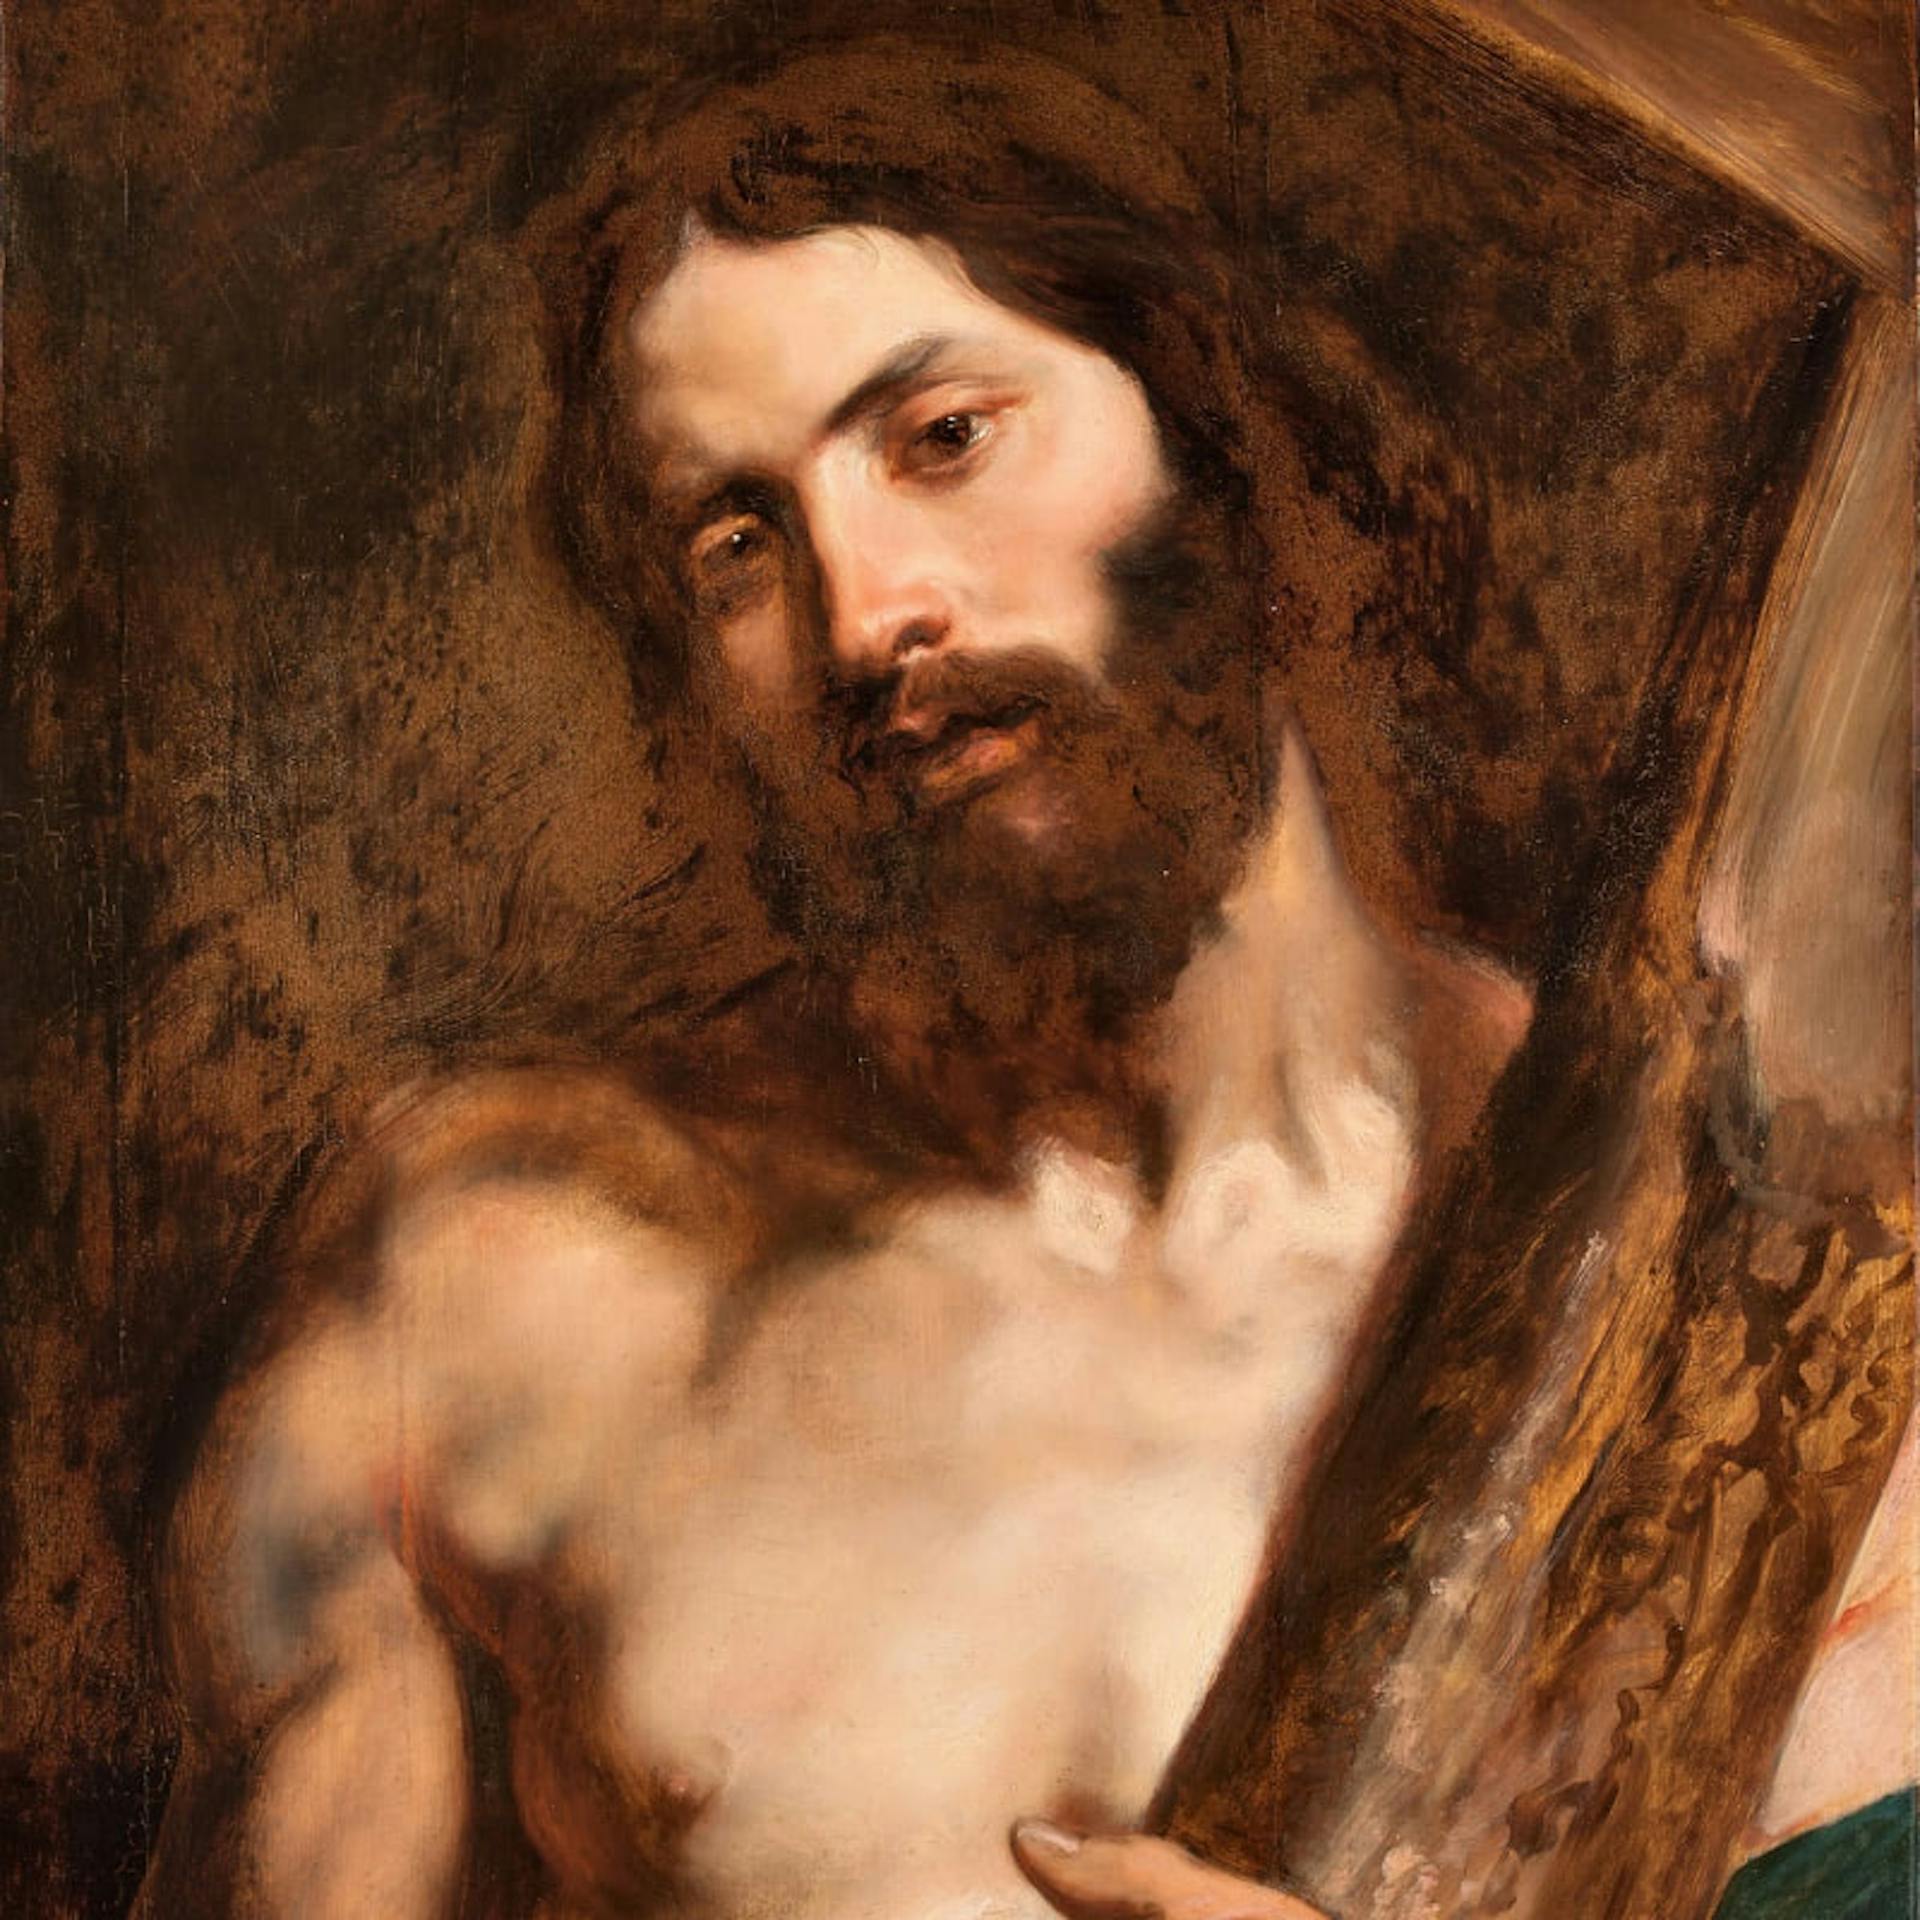 Some artistic depictions of Jesus are really sexy.